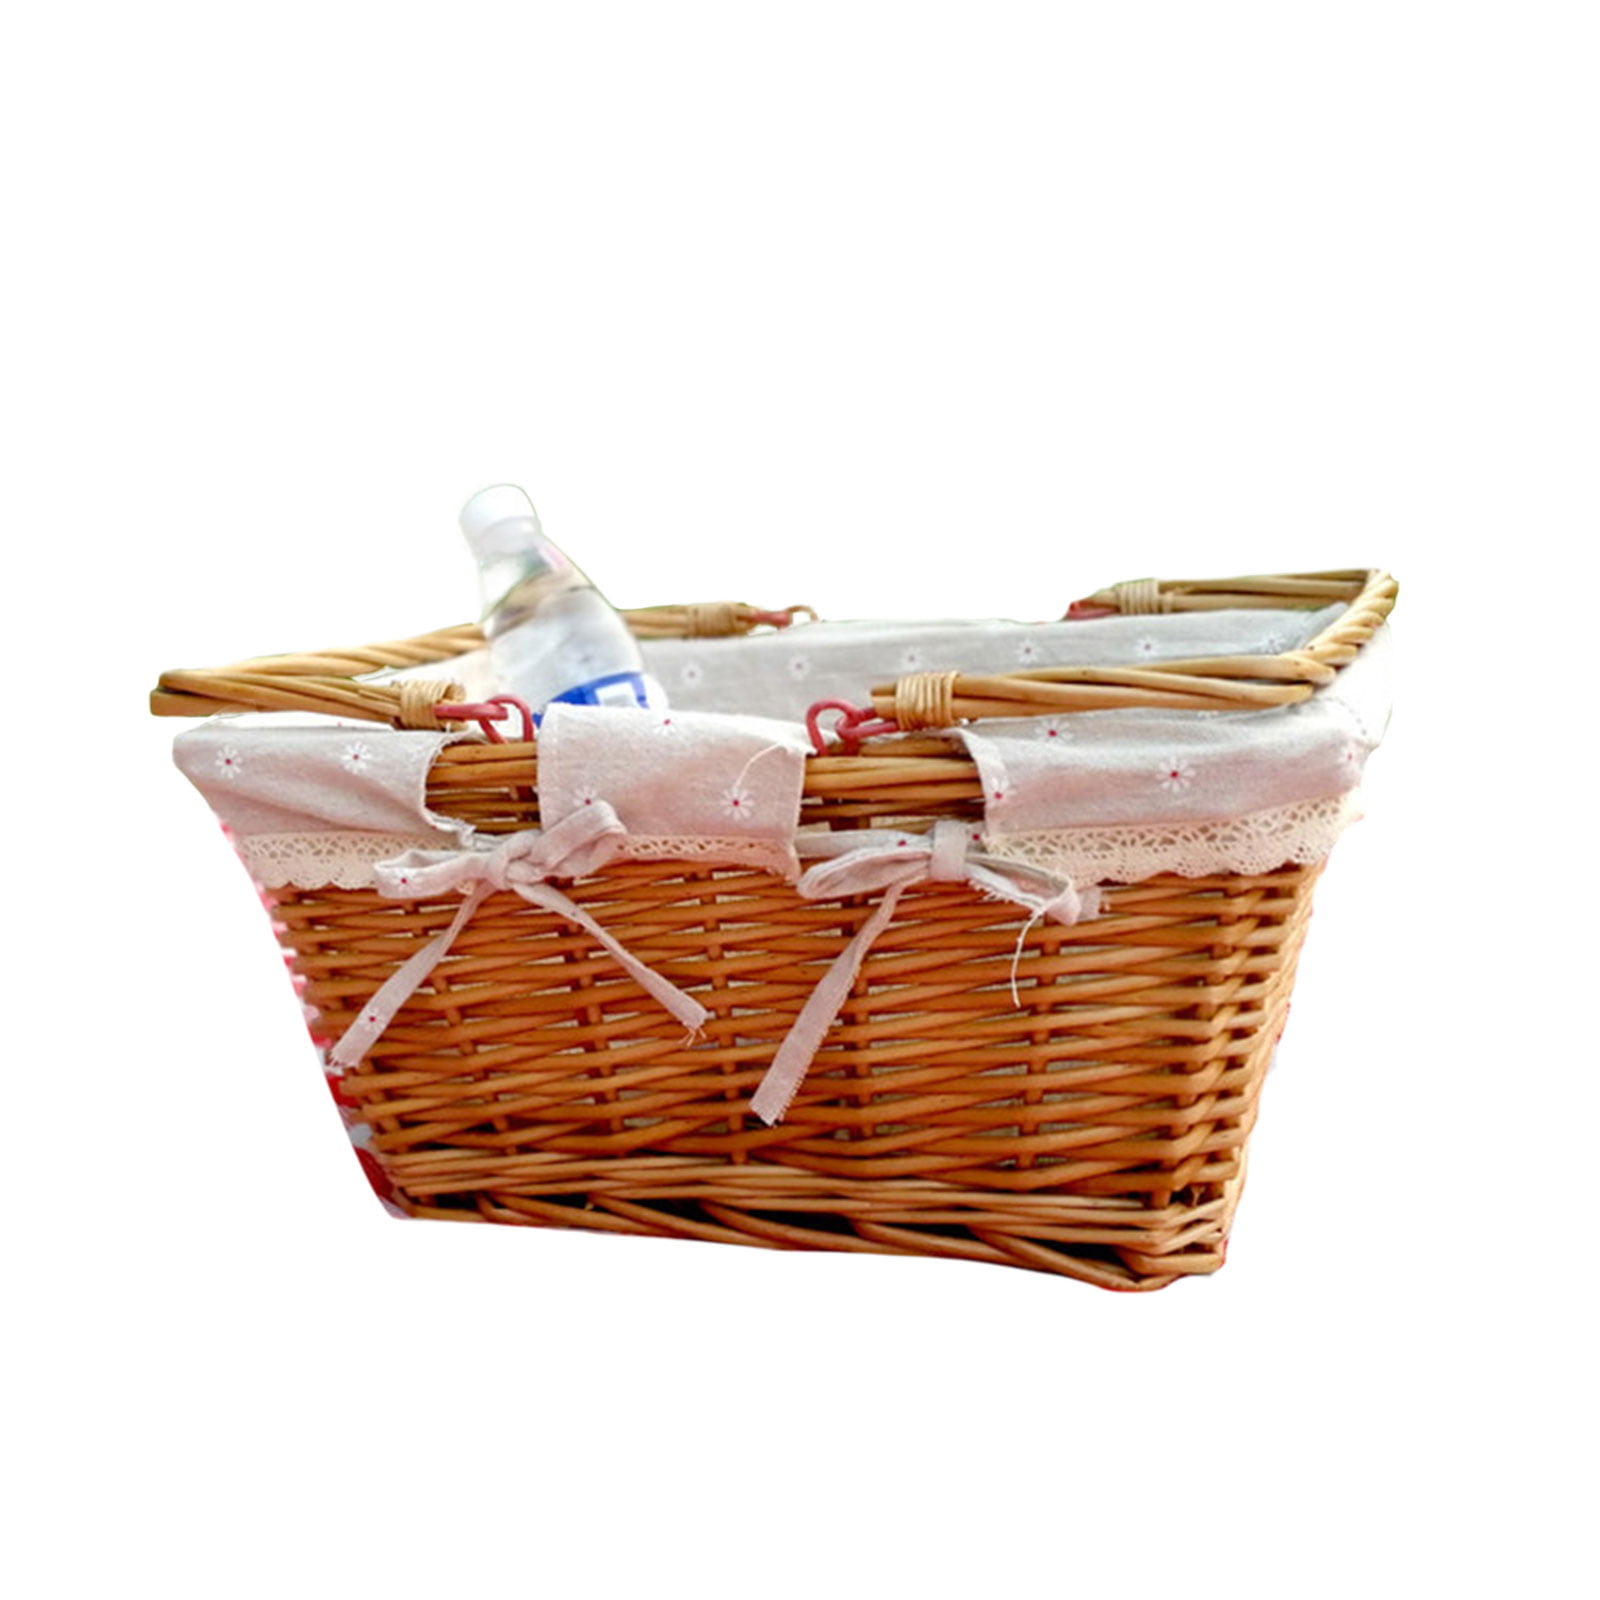 Storage Baskets for Storing Plastic Easter Eggs and Easter Sweets Natural Woven Picnic Basket Japanese Woven Basket with Lid Outdoor Picnic Basket 